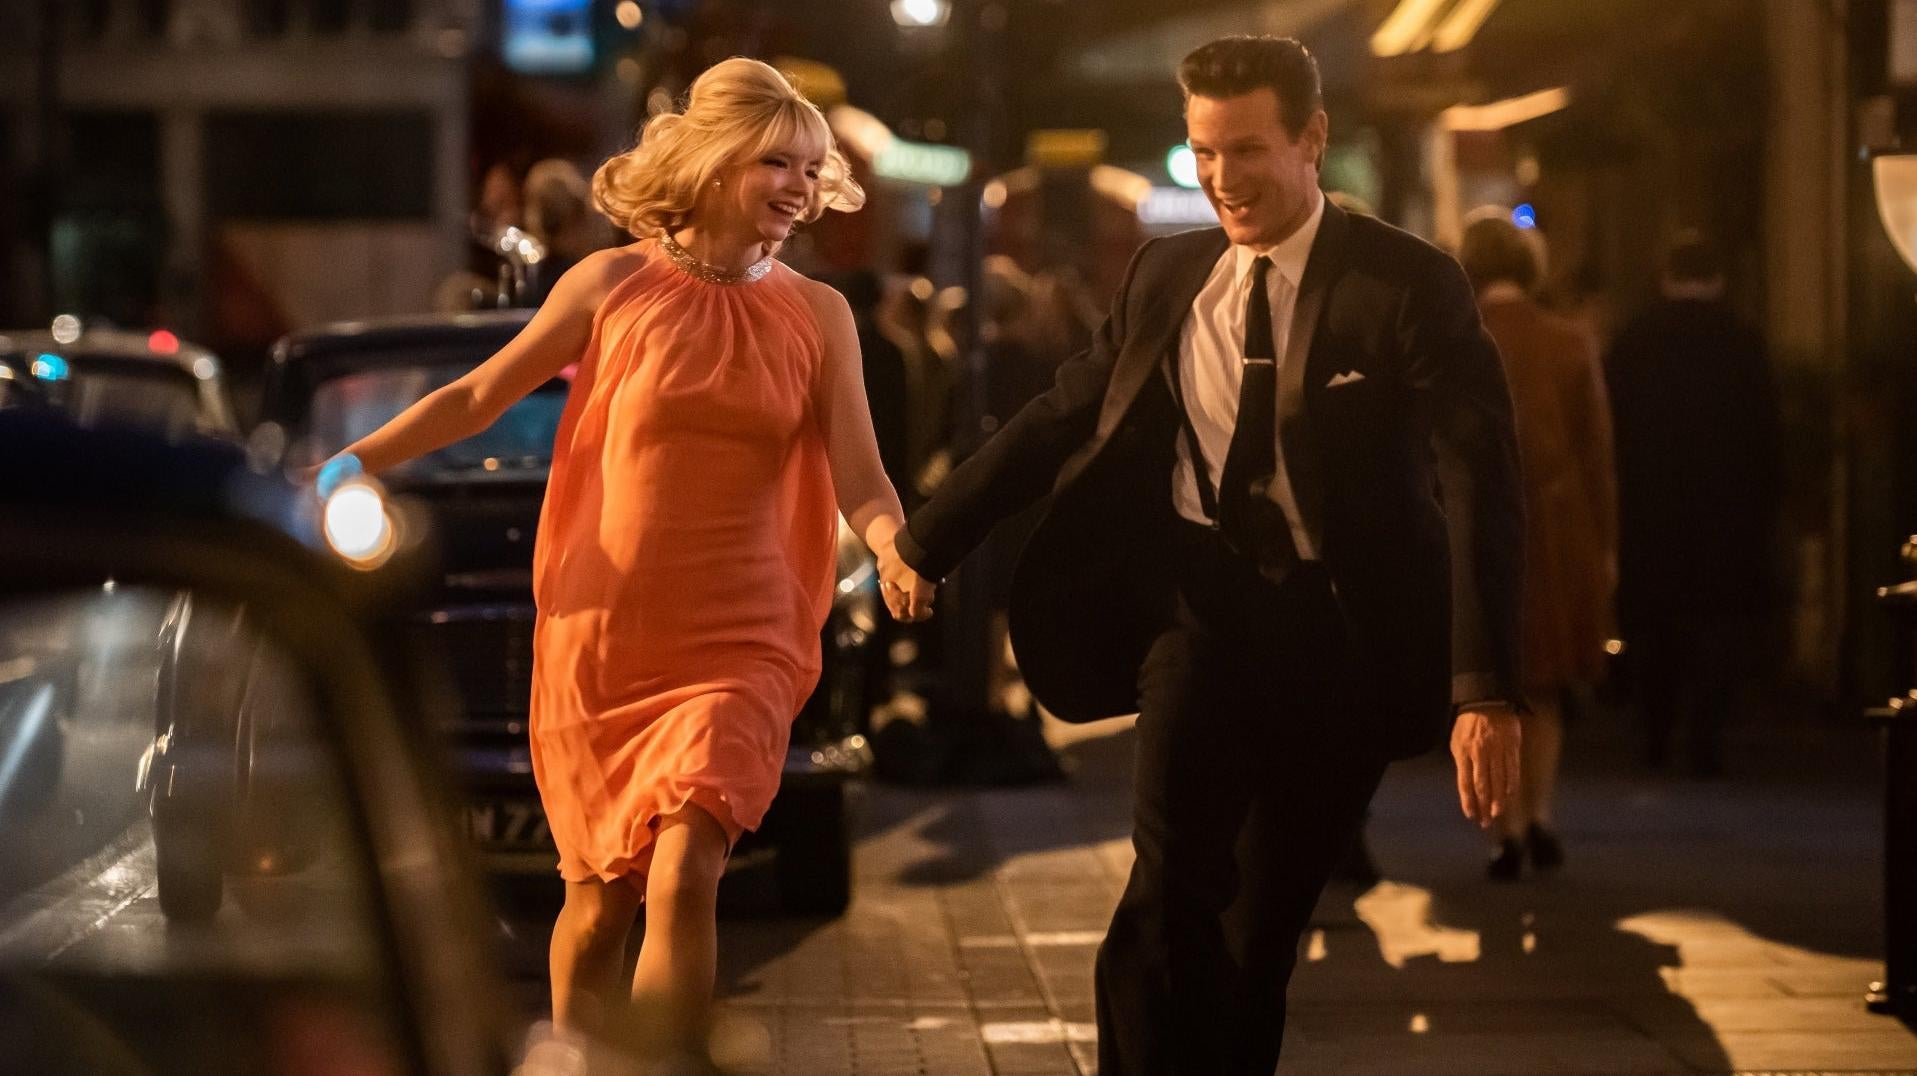 Taylor-Joy and Smith frolicking in London. (Image: Focus Features)